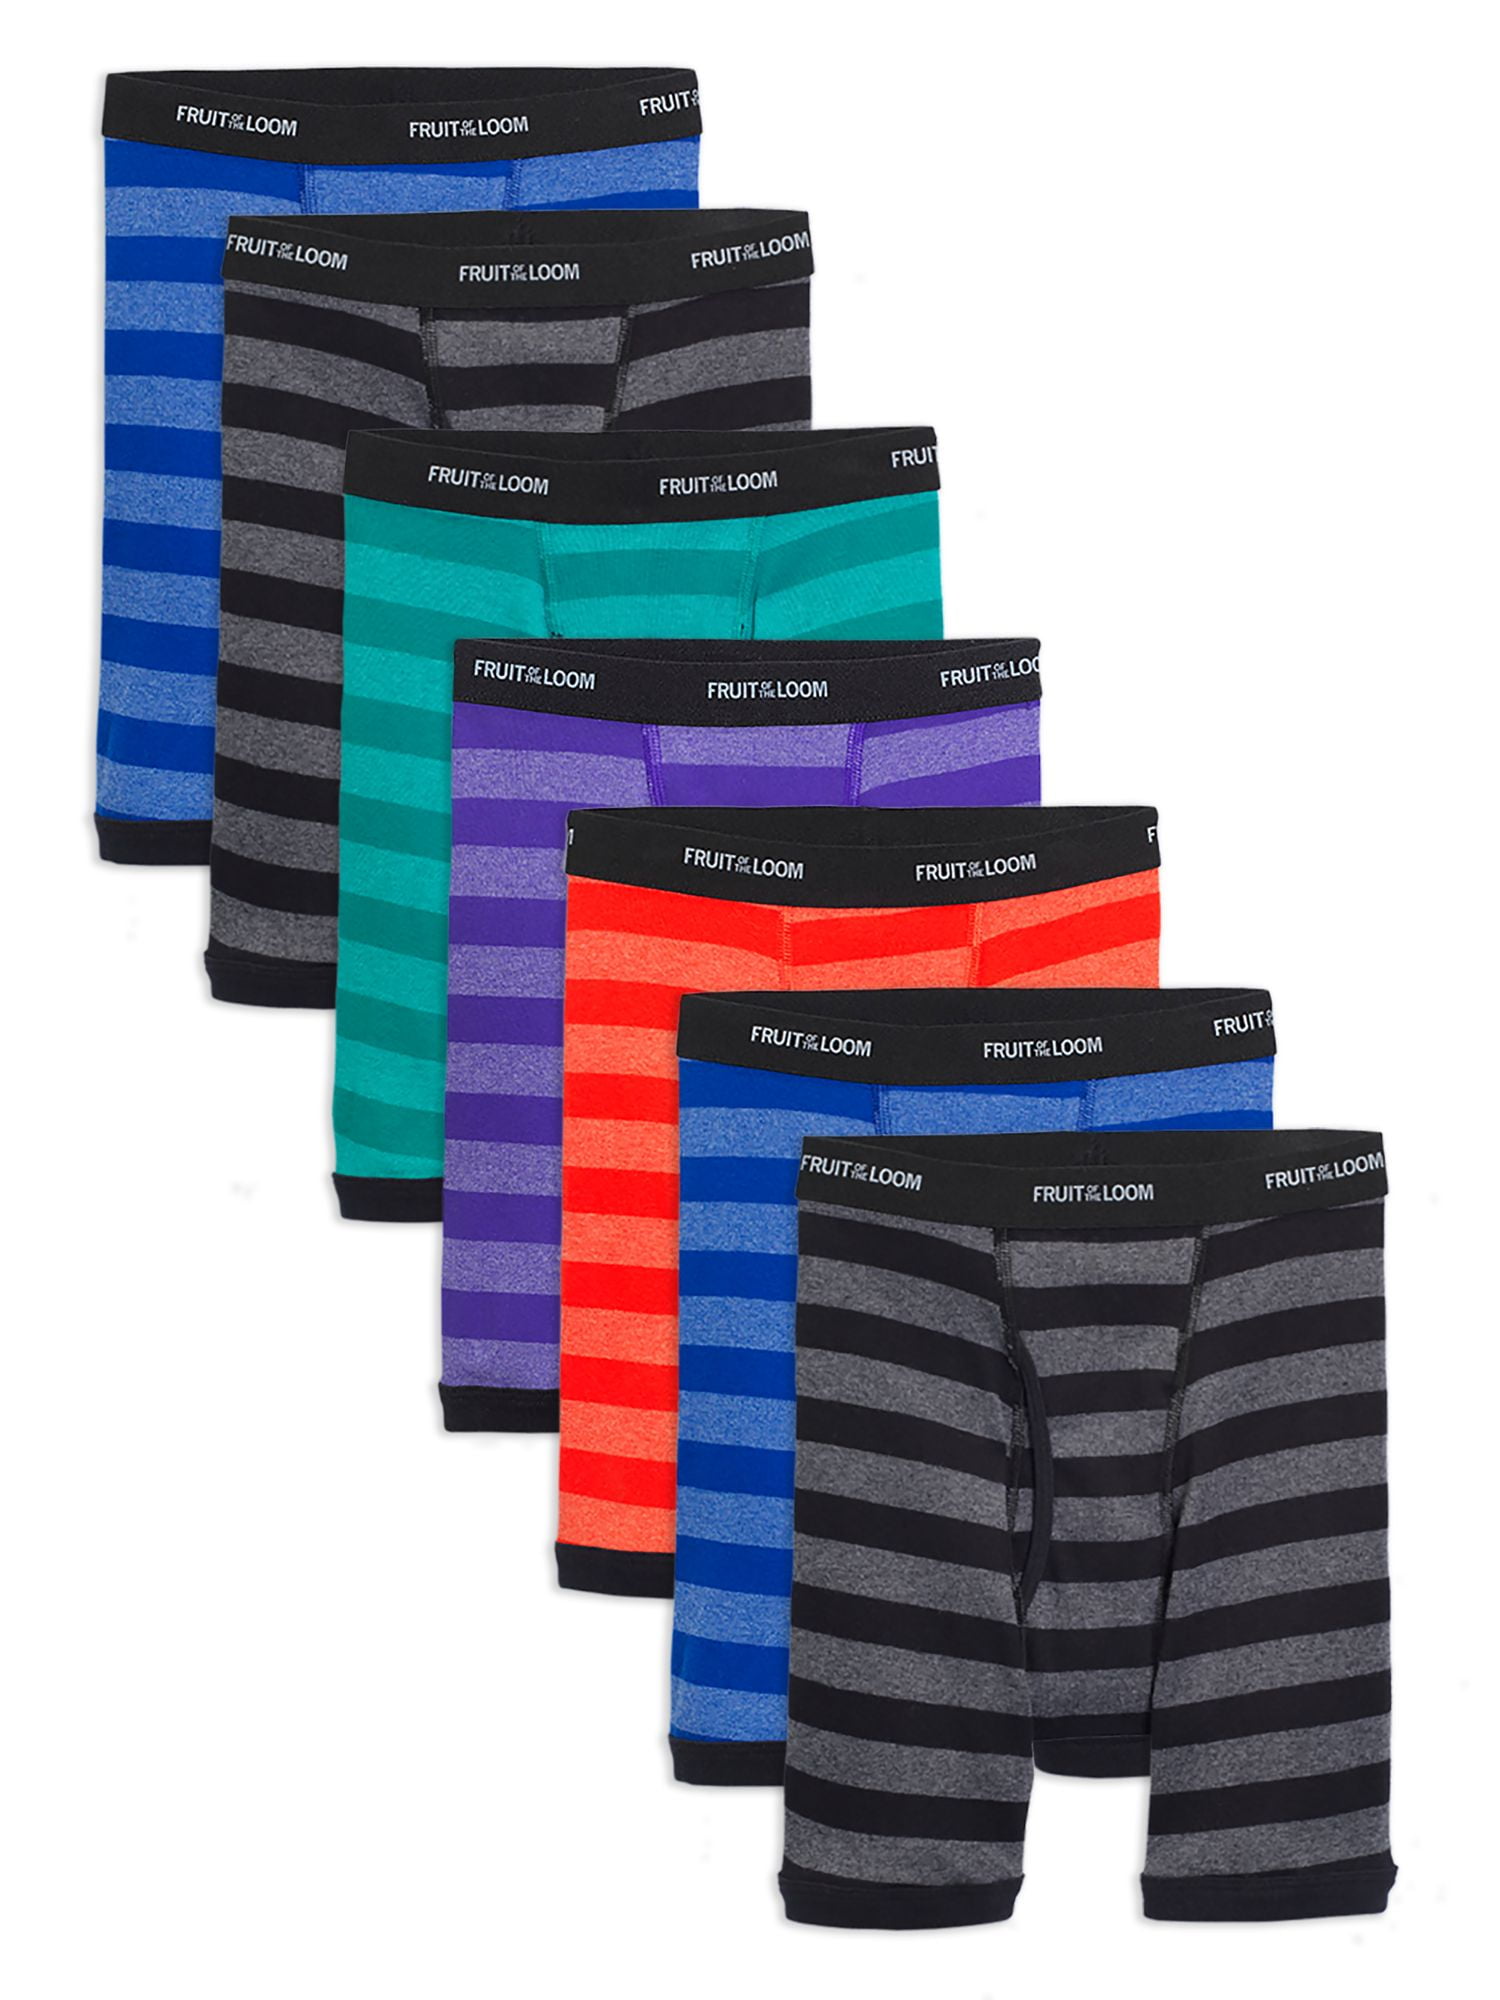 Fruit of the Loom Boys Boxer Briefs Assorted Colors